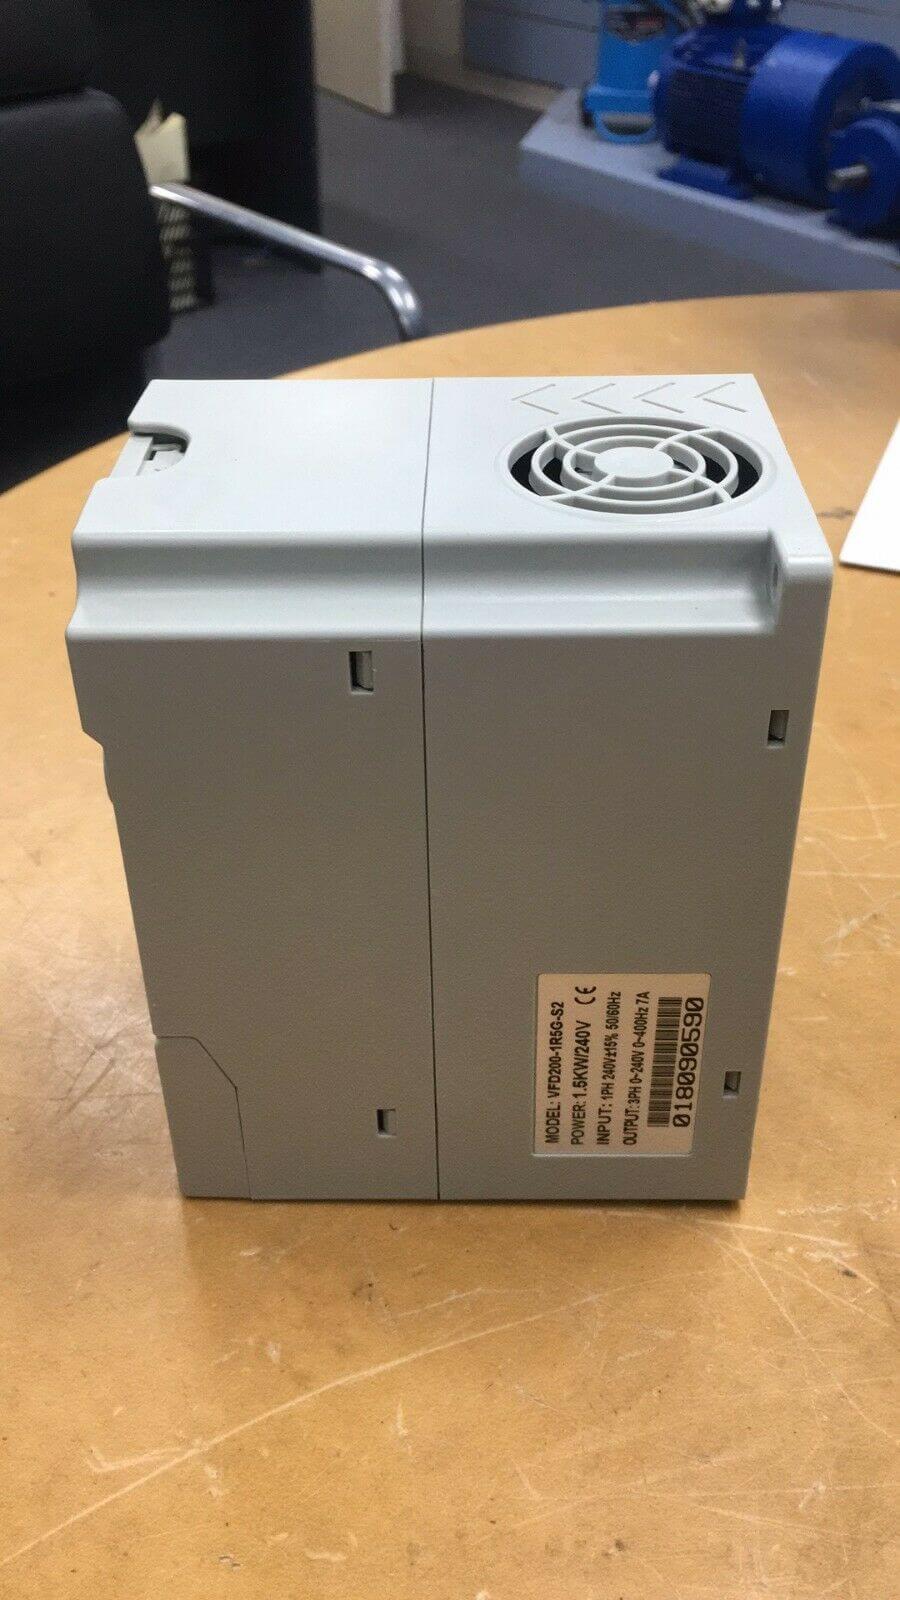 VFD200 smart mini variable frequency drives 1.5kw 2hp single phase 